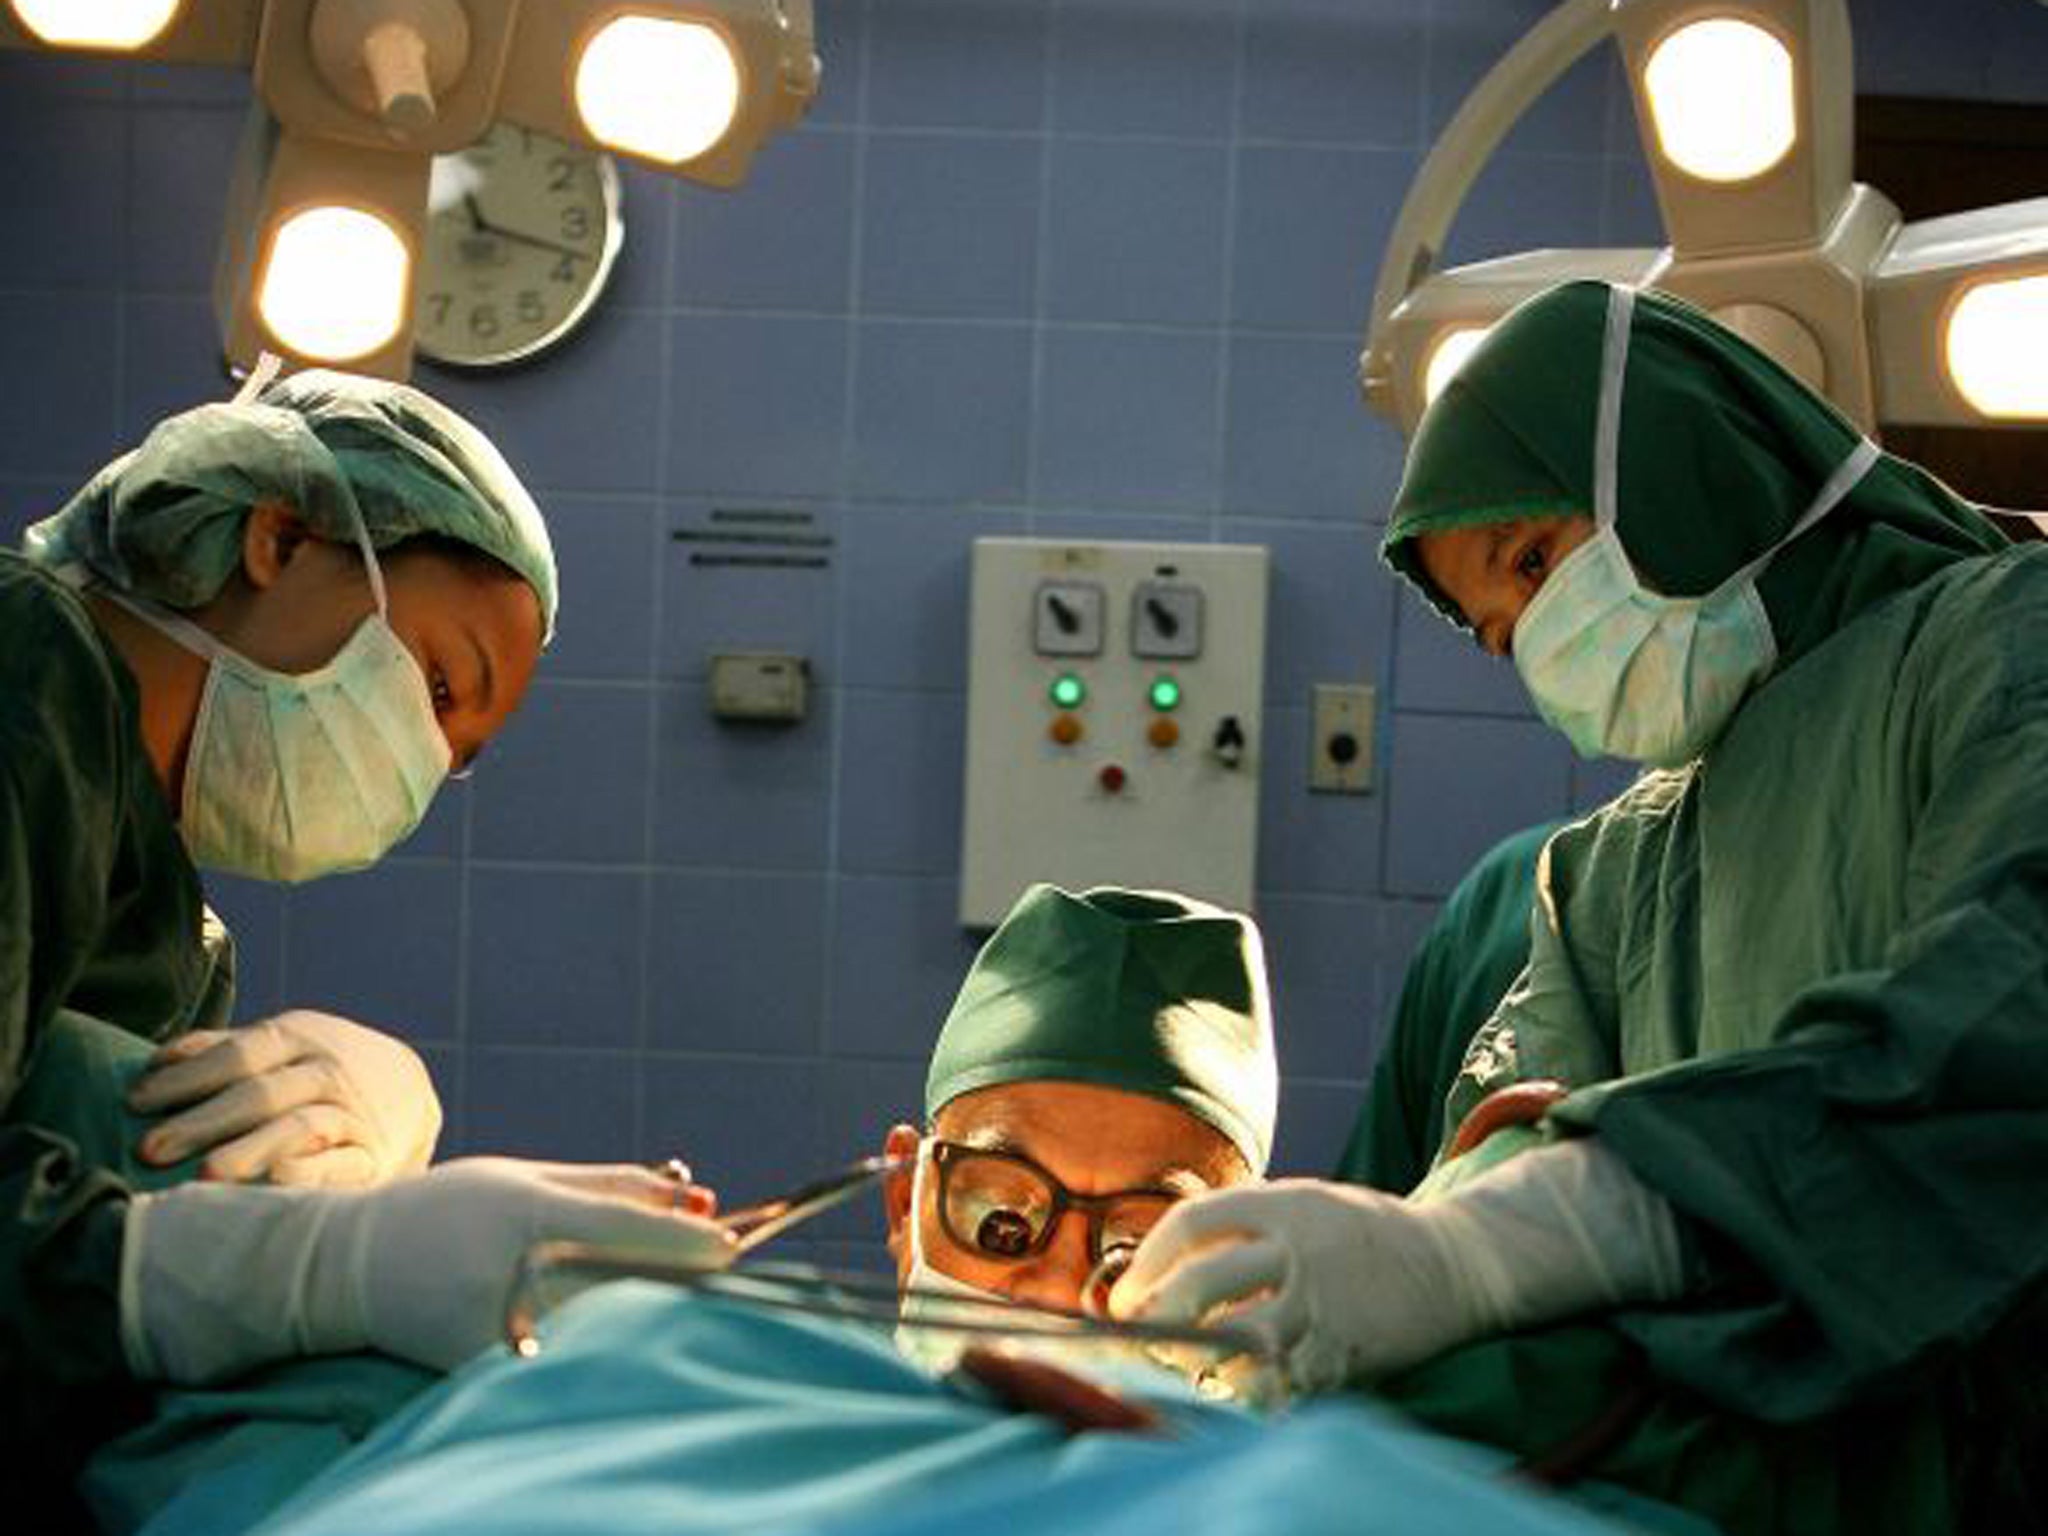 Doctors have urged closer scrutiny of the personal motivations behind cosmetic surgery